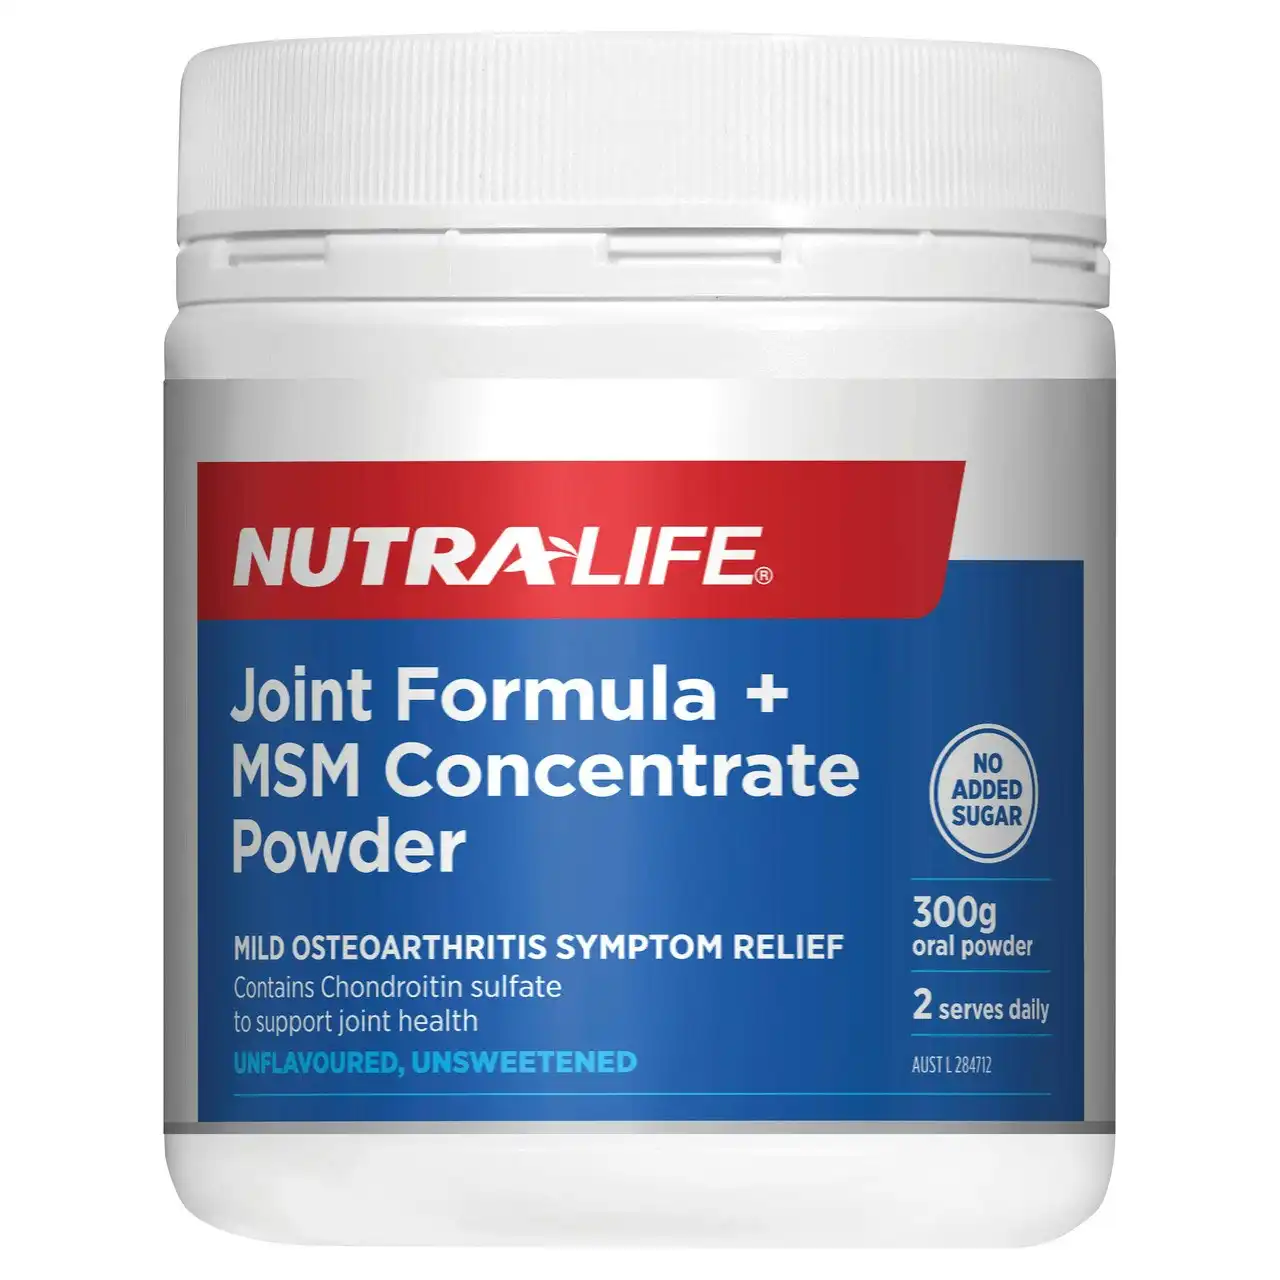 Nutra-Life Joint Formula + MSM Concentrate Powder 300g